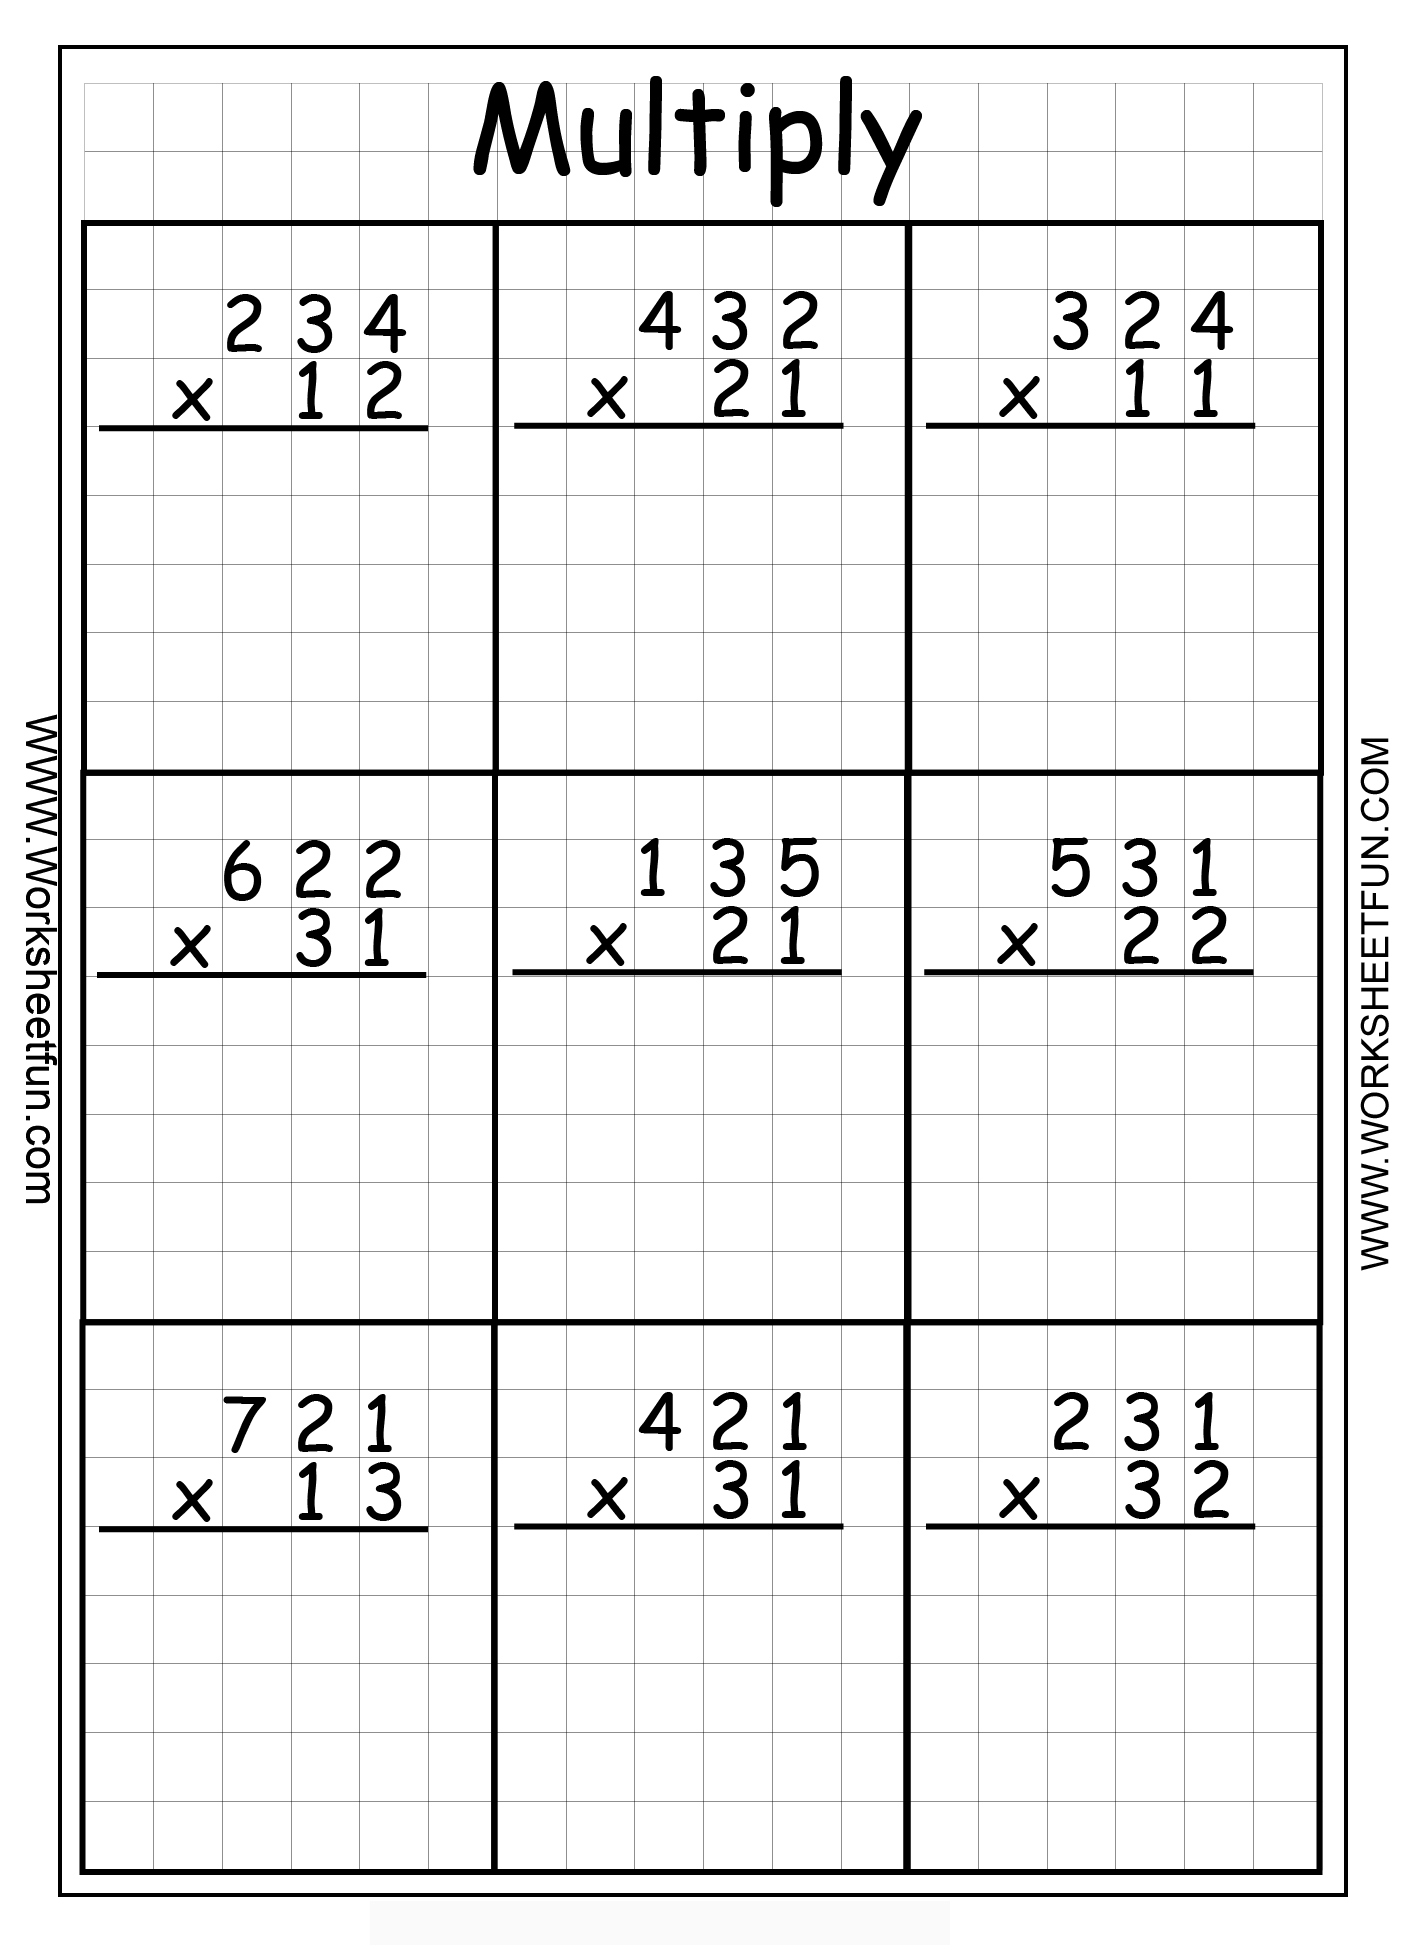 Multiplication Worksheets | Multiplication Worksheets, Math with regard to Printable Long Multiplication Worksheets